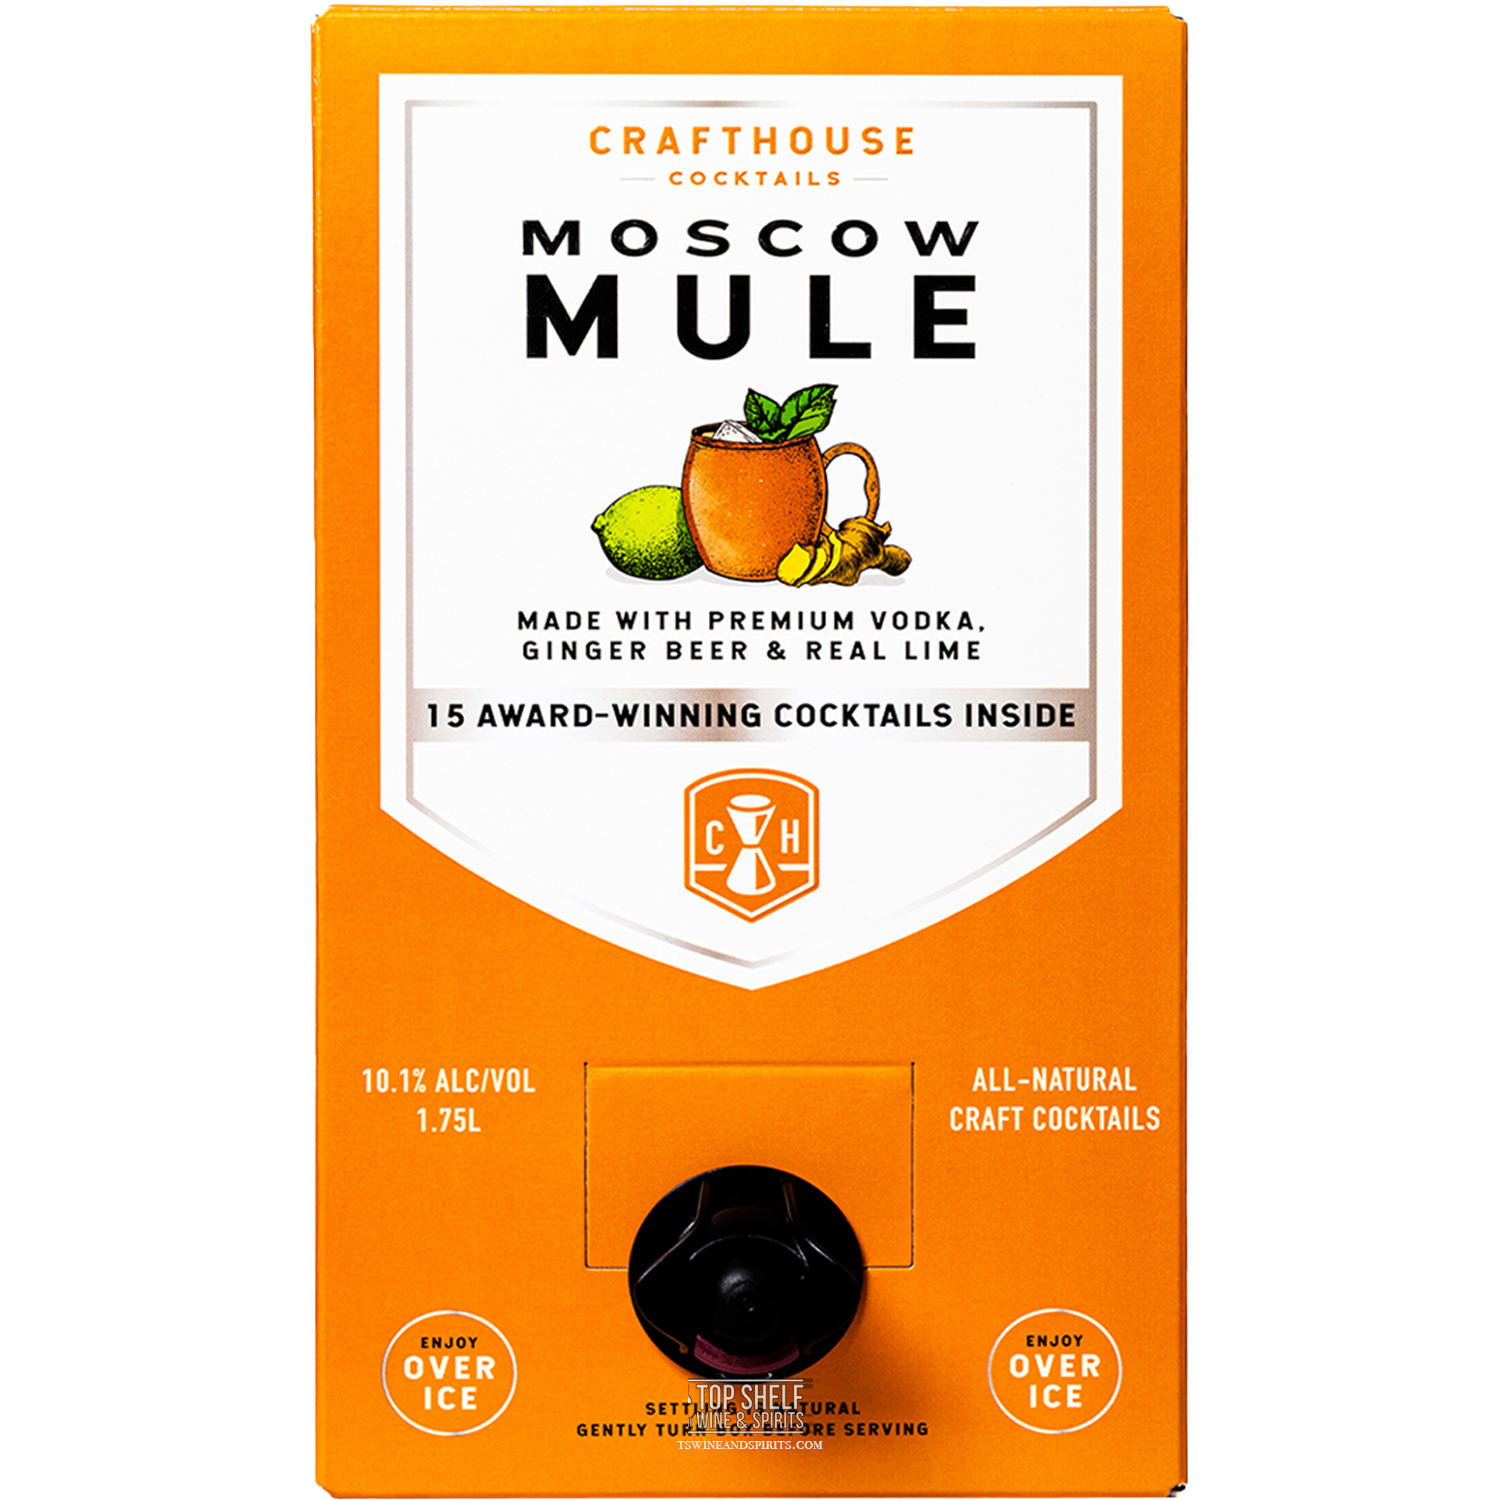 Crafthouse Cocktails Moscow Mule 1.75L